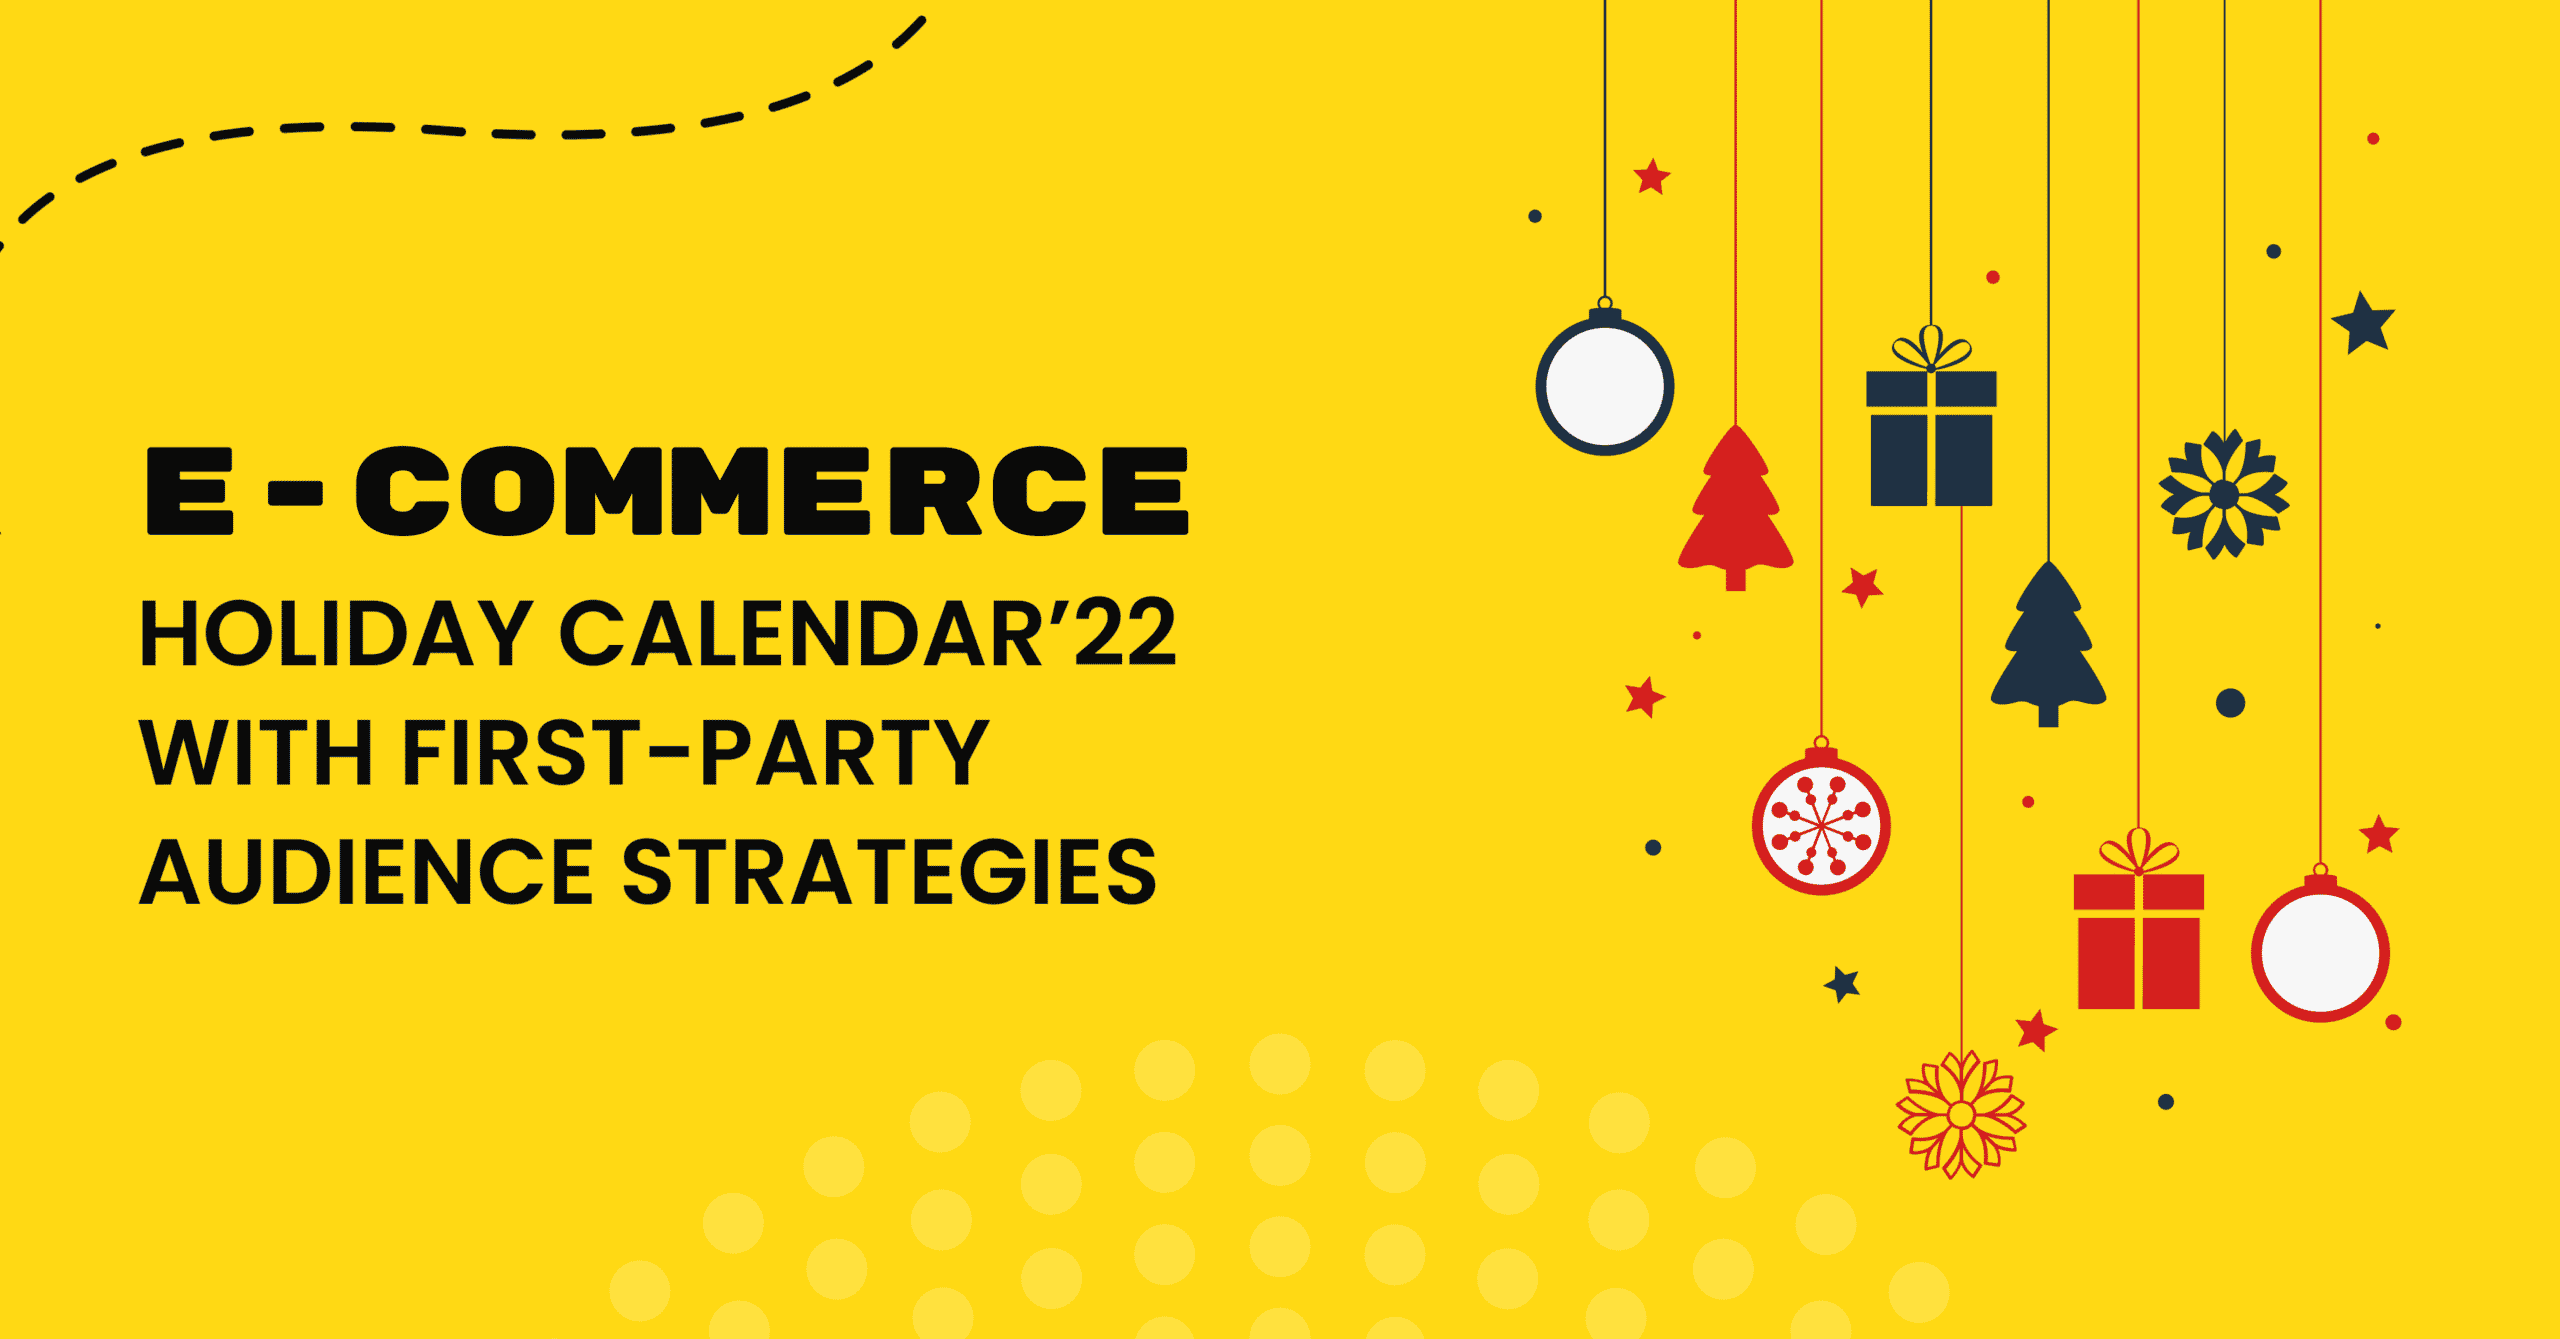 E-Commerce holiday calendar’22 with first-party audience strategies